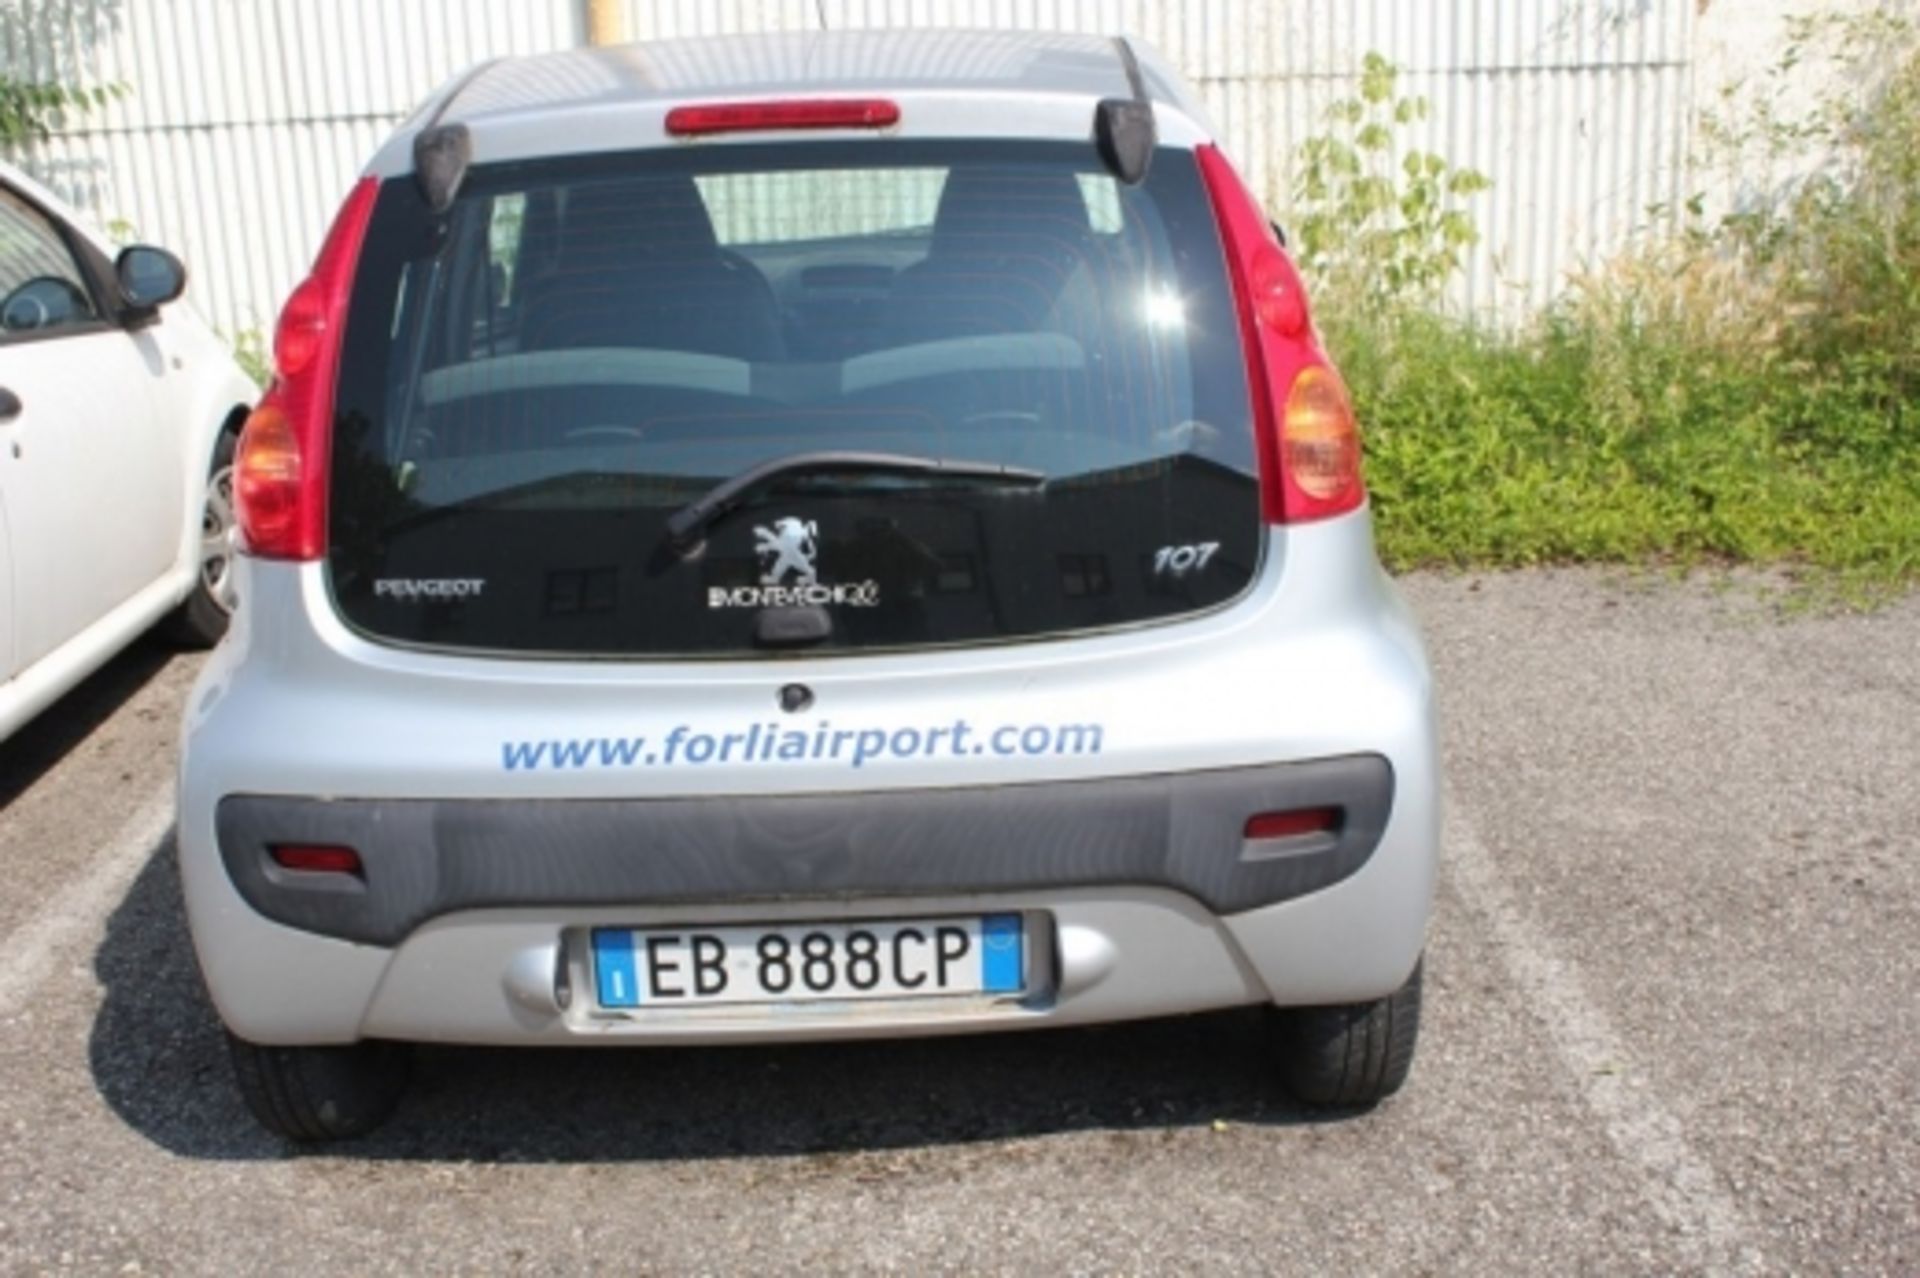 1,Peugeot 107 Plate:EB888CP color: white, gasoline engine, mileage: 16.316 km, body: various dents - Image 3 of 4